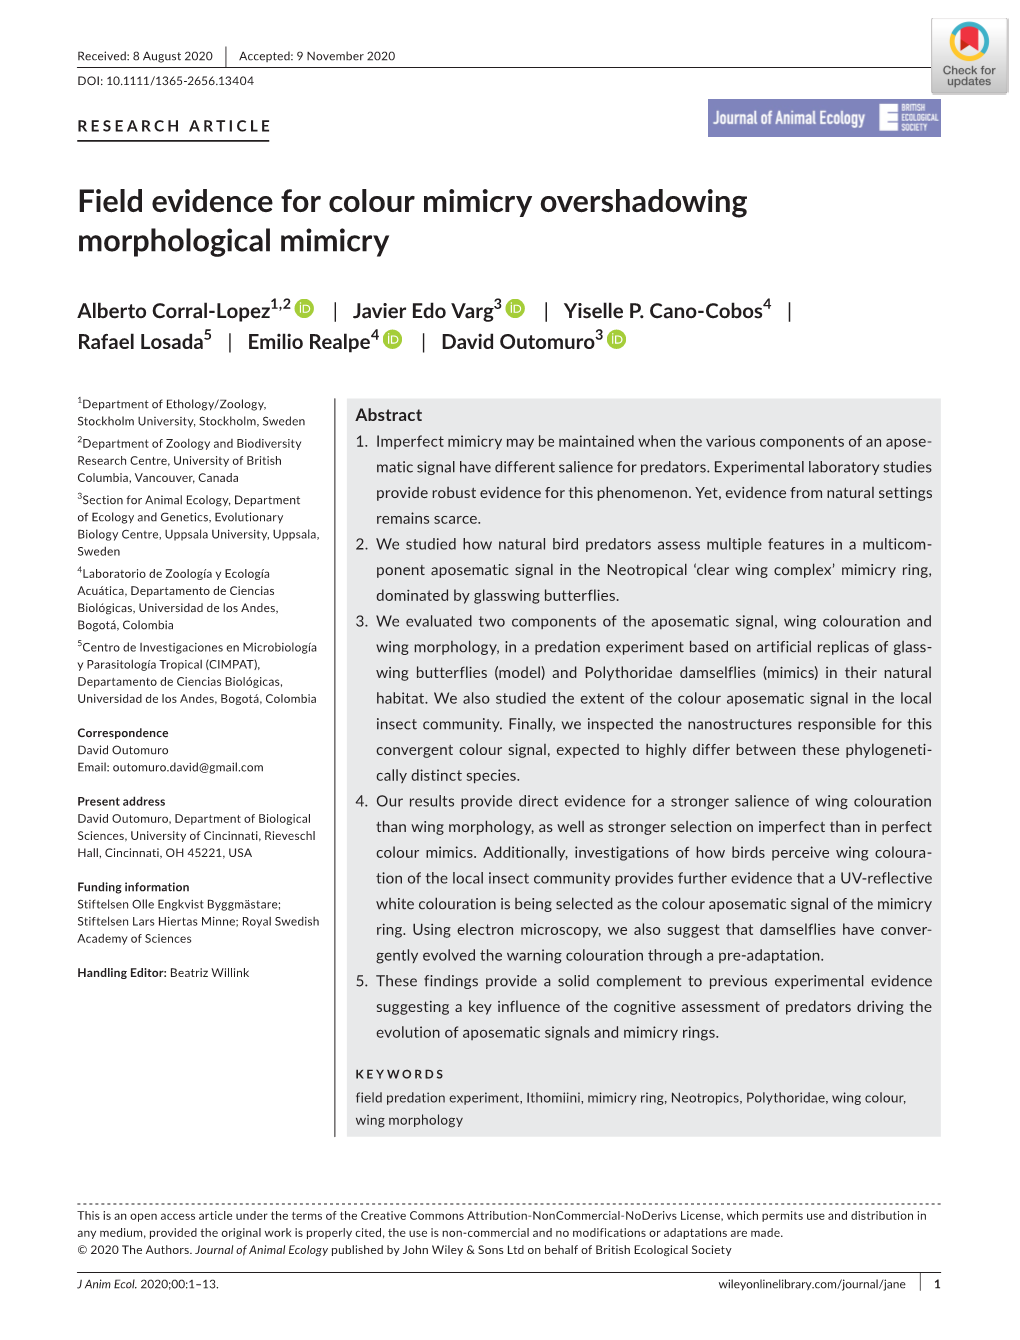 Field Evidence for Colour Mimicry Overshadowing Morphological Mimicry